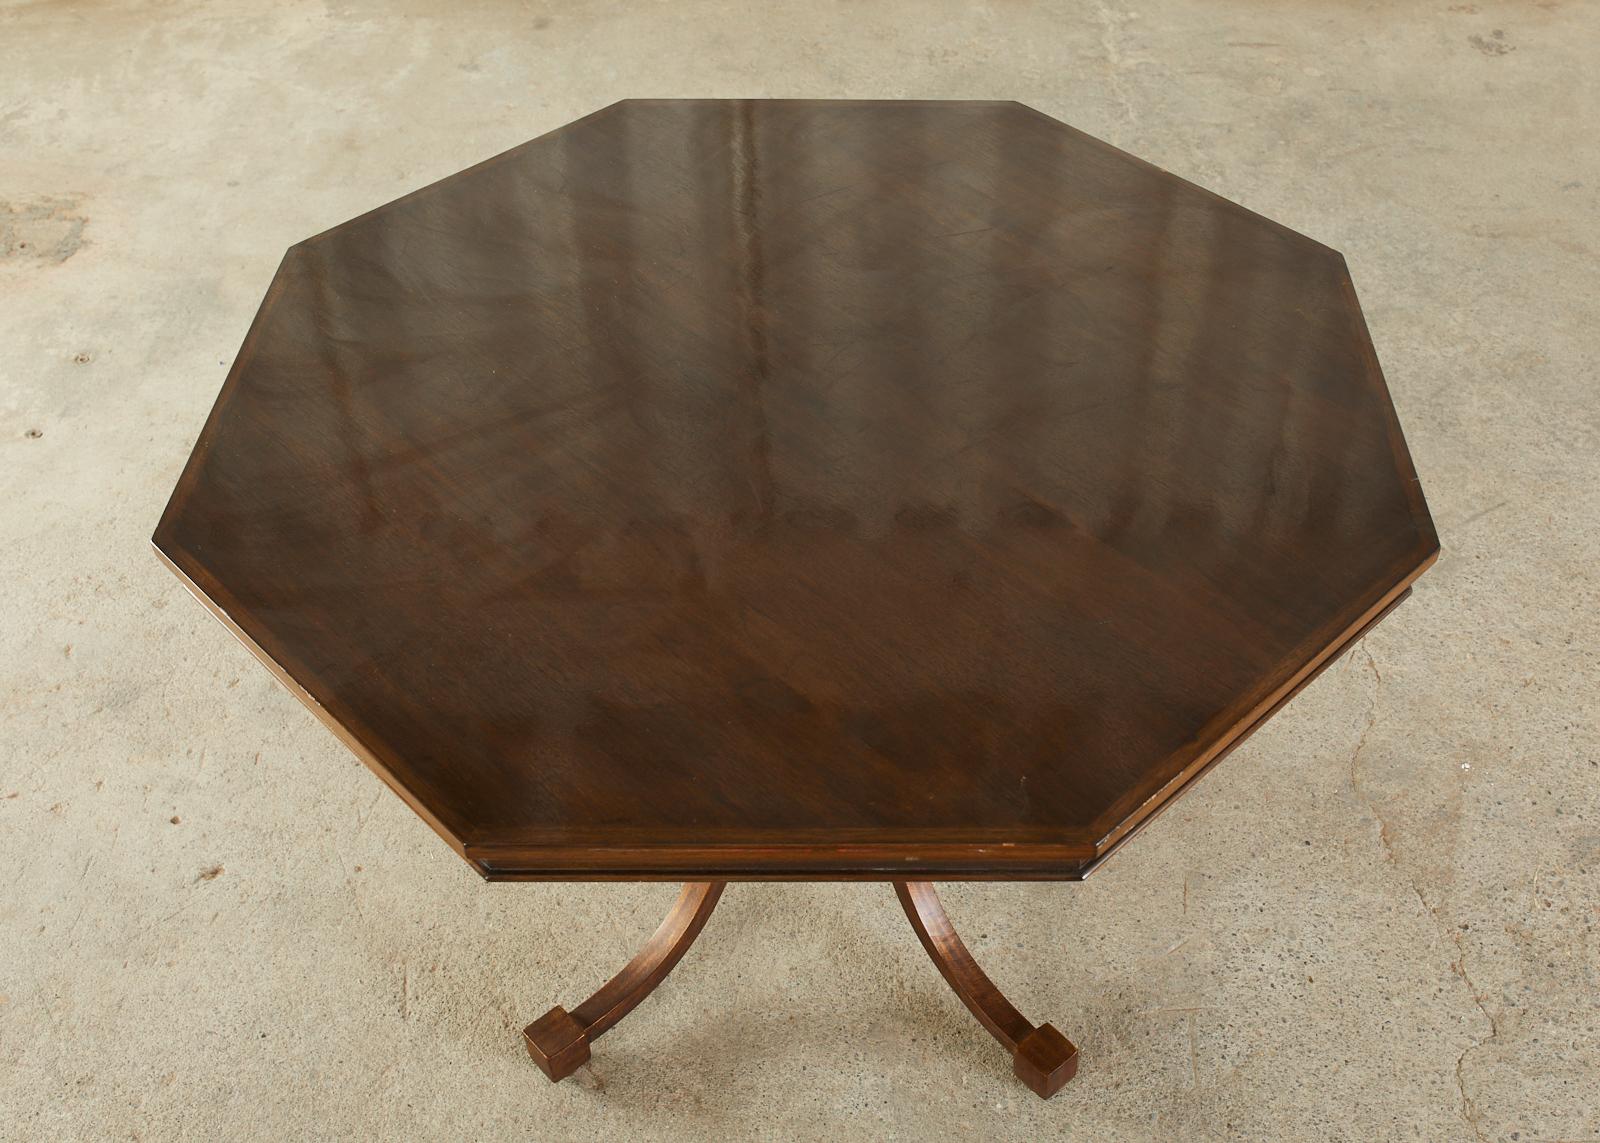 Unique walnut and iron dining table or center table featuring a hexagonal shaped top. Bespoke table made by Murrays ironworks foundry in Los Angeles, CA for an estate in Bel Air, CA. The wood top is supported by four gracefully curved square iron